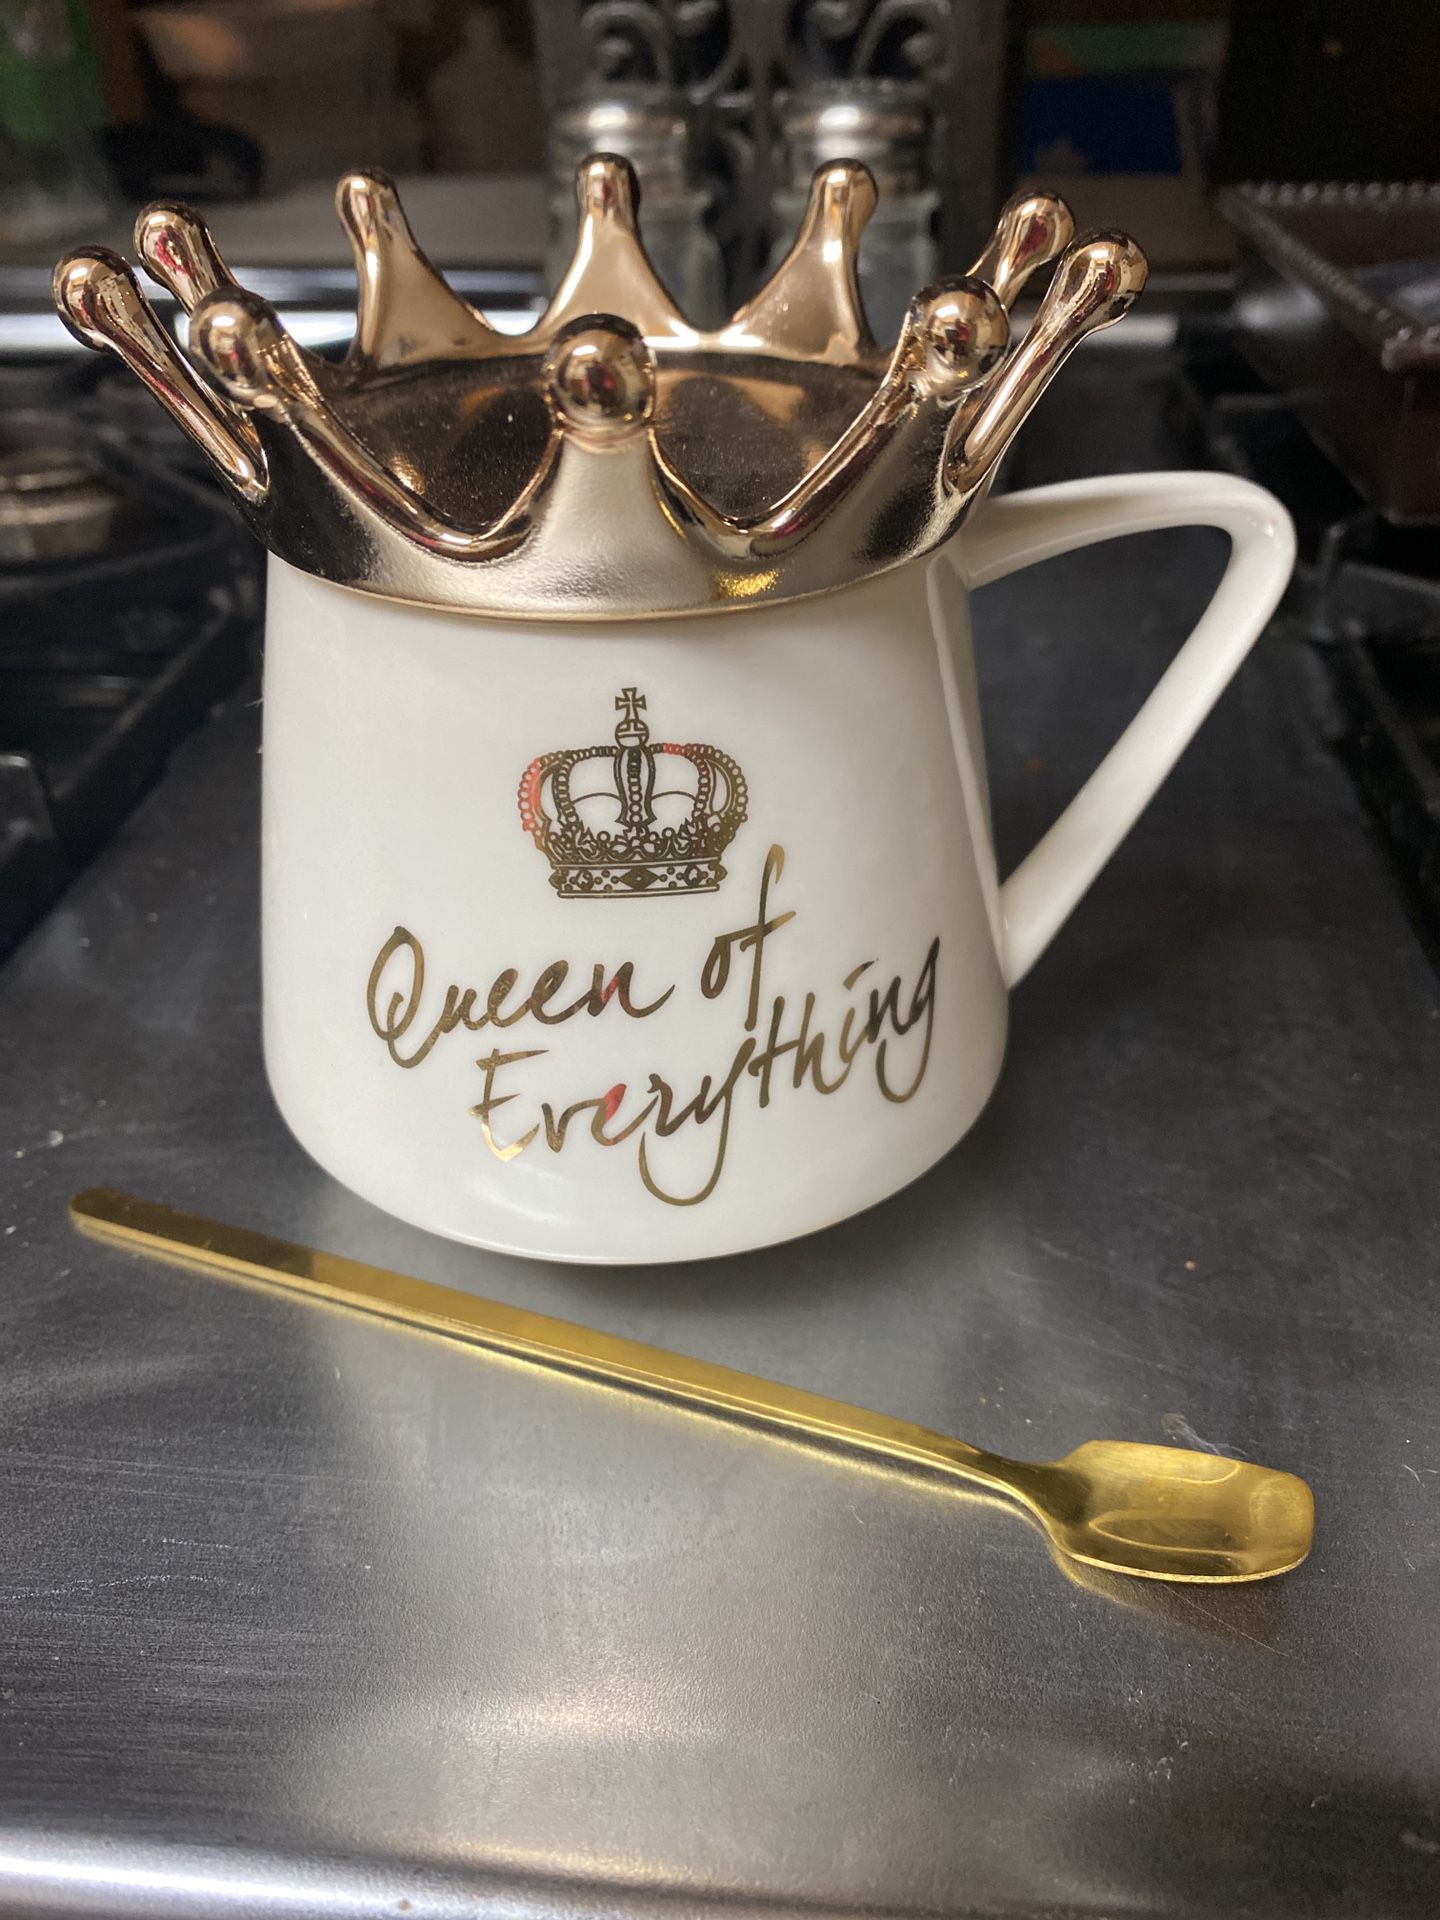 Queen of everything mug